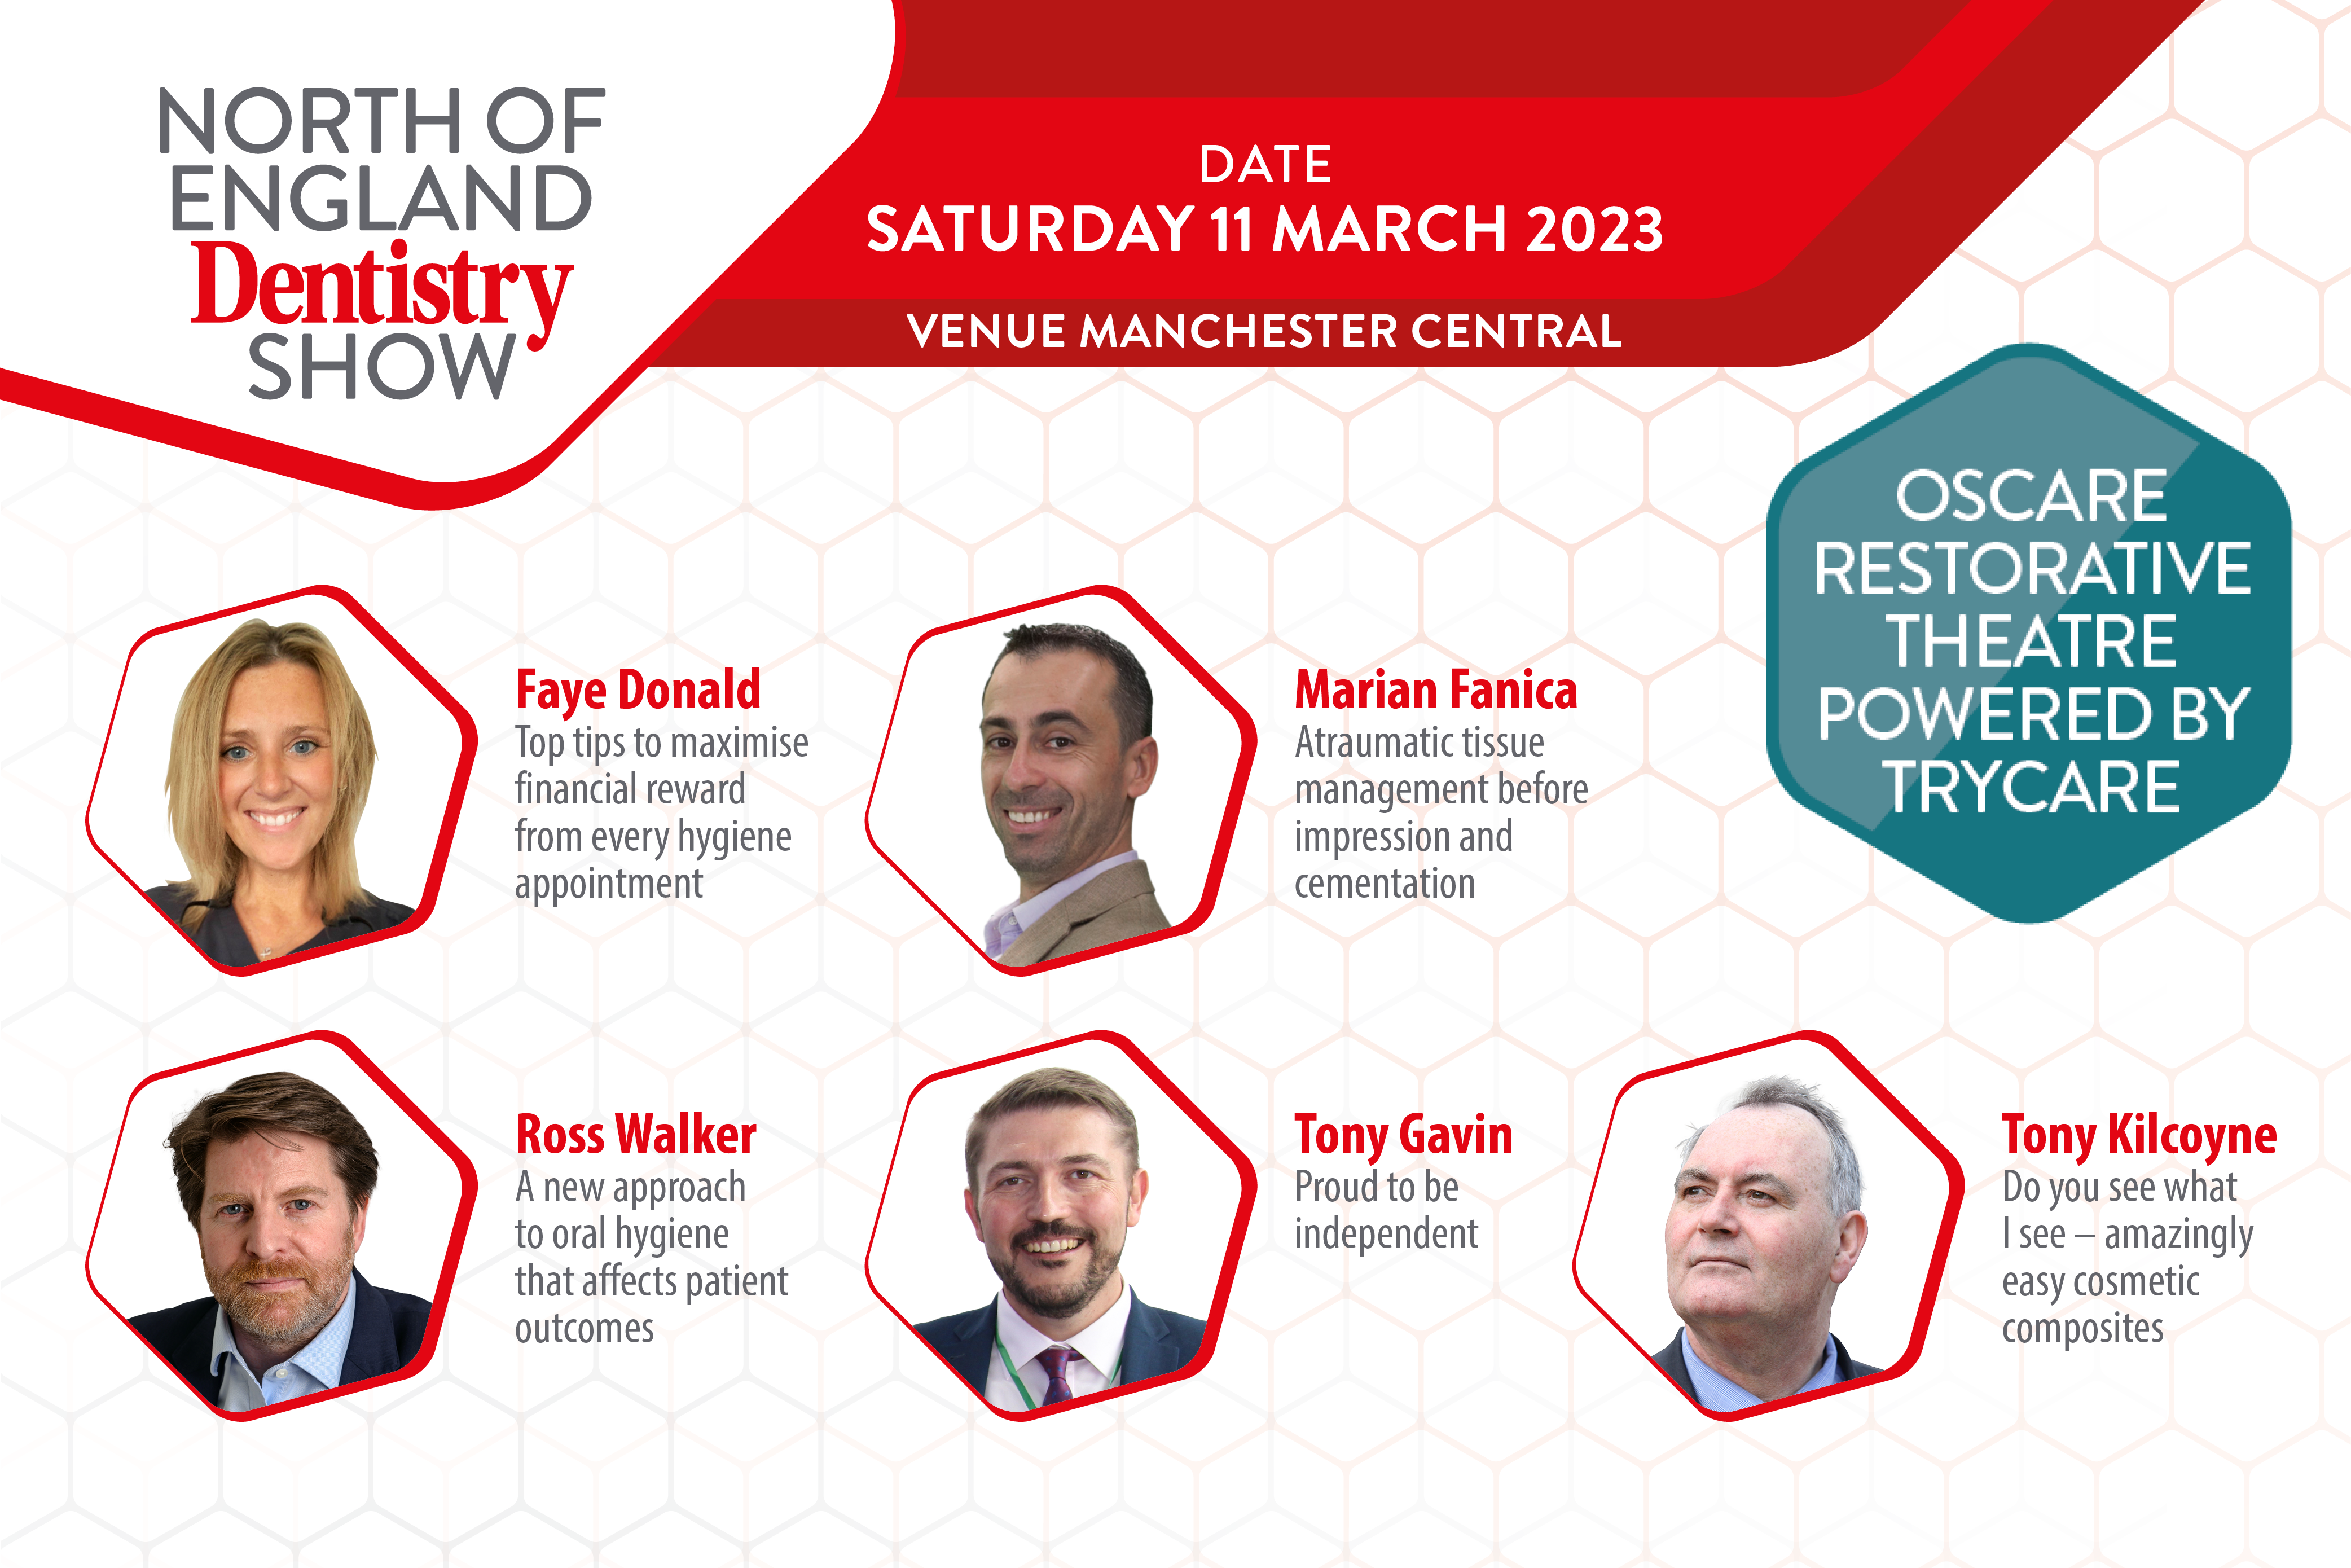 With 12 theatres, over 85 speakers, and hundreds of leading brands, there's lots to do and see at the North of England Dentistry Show.